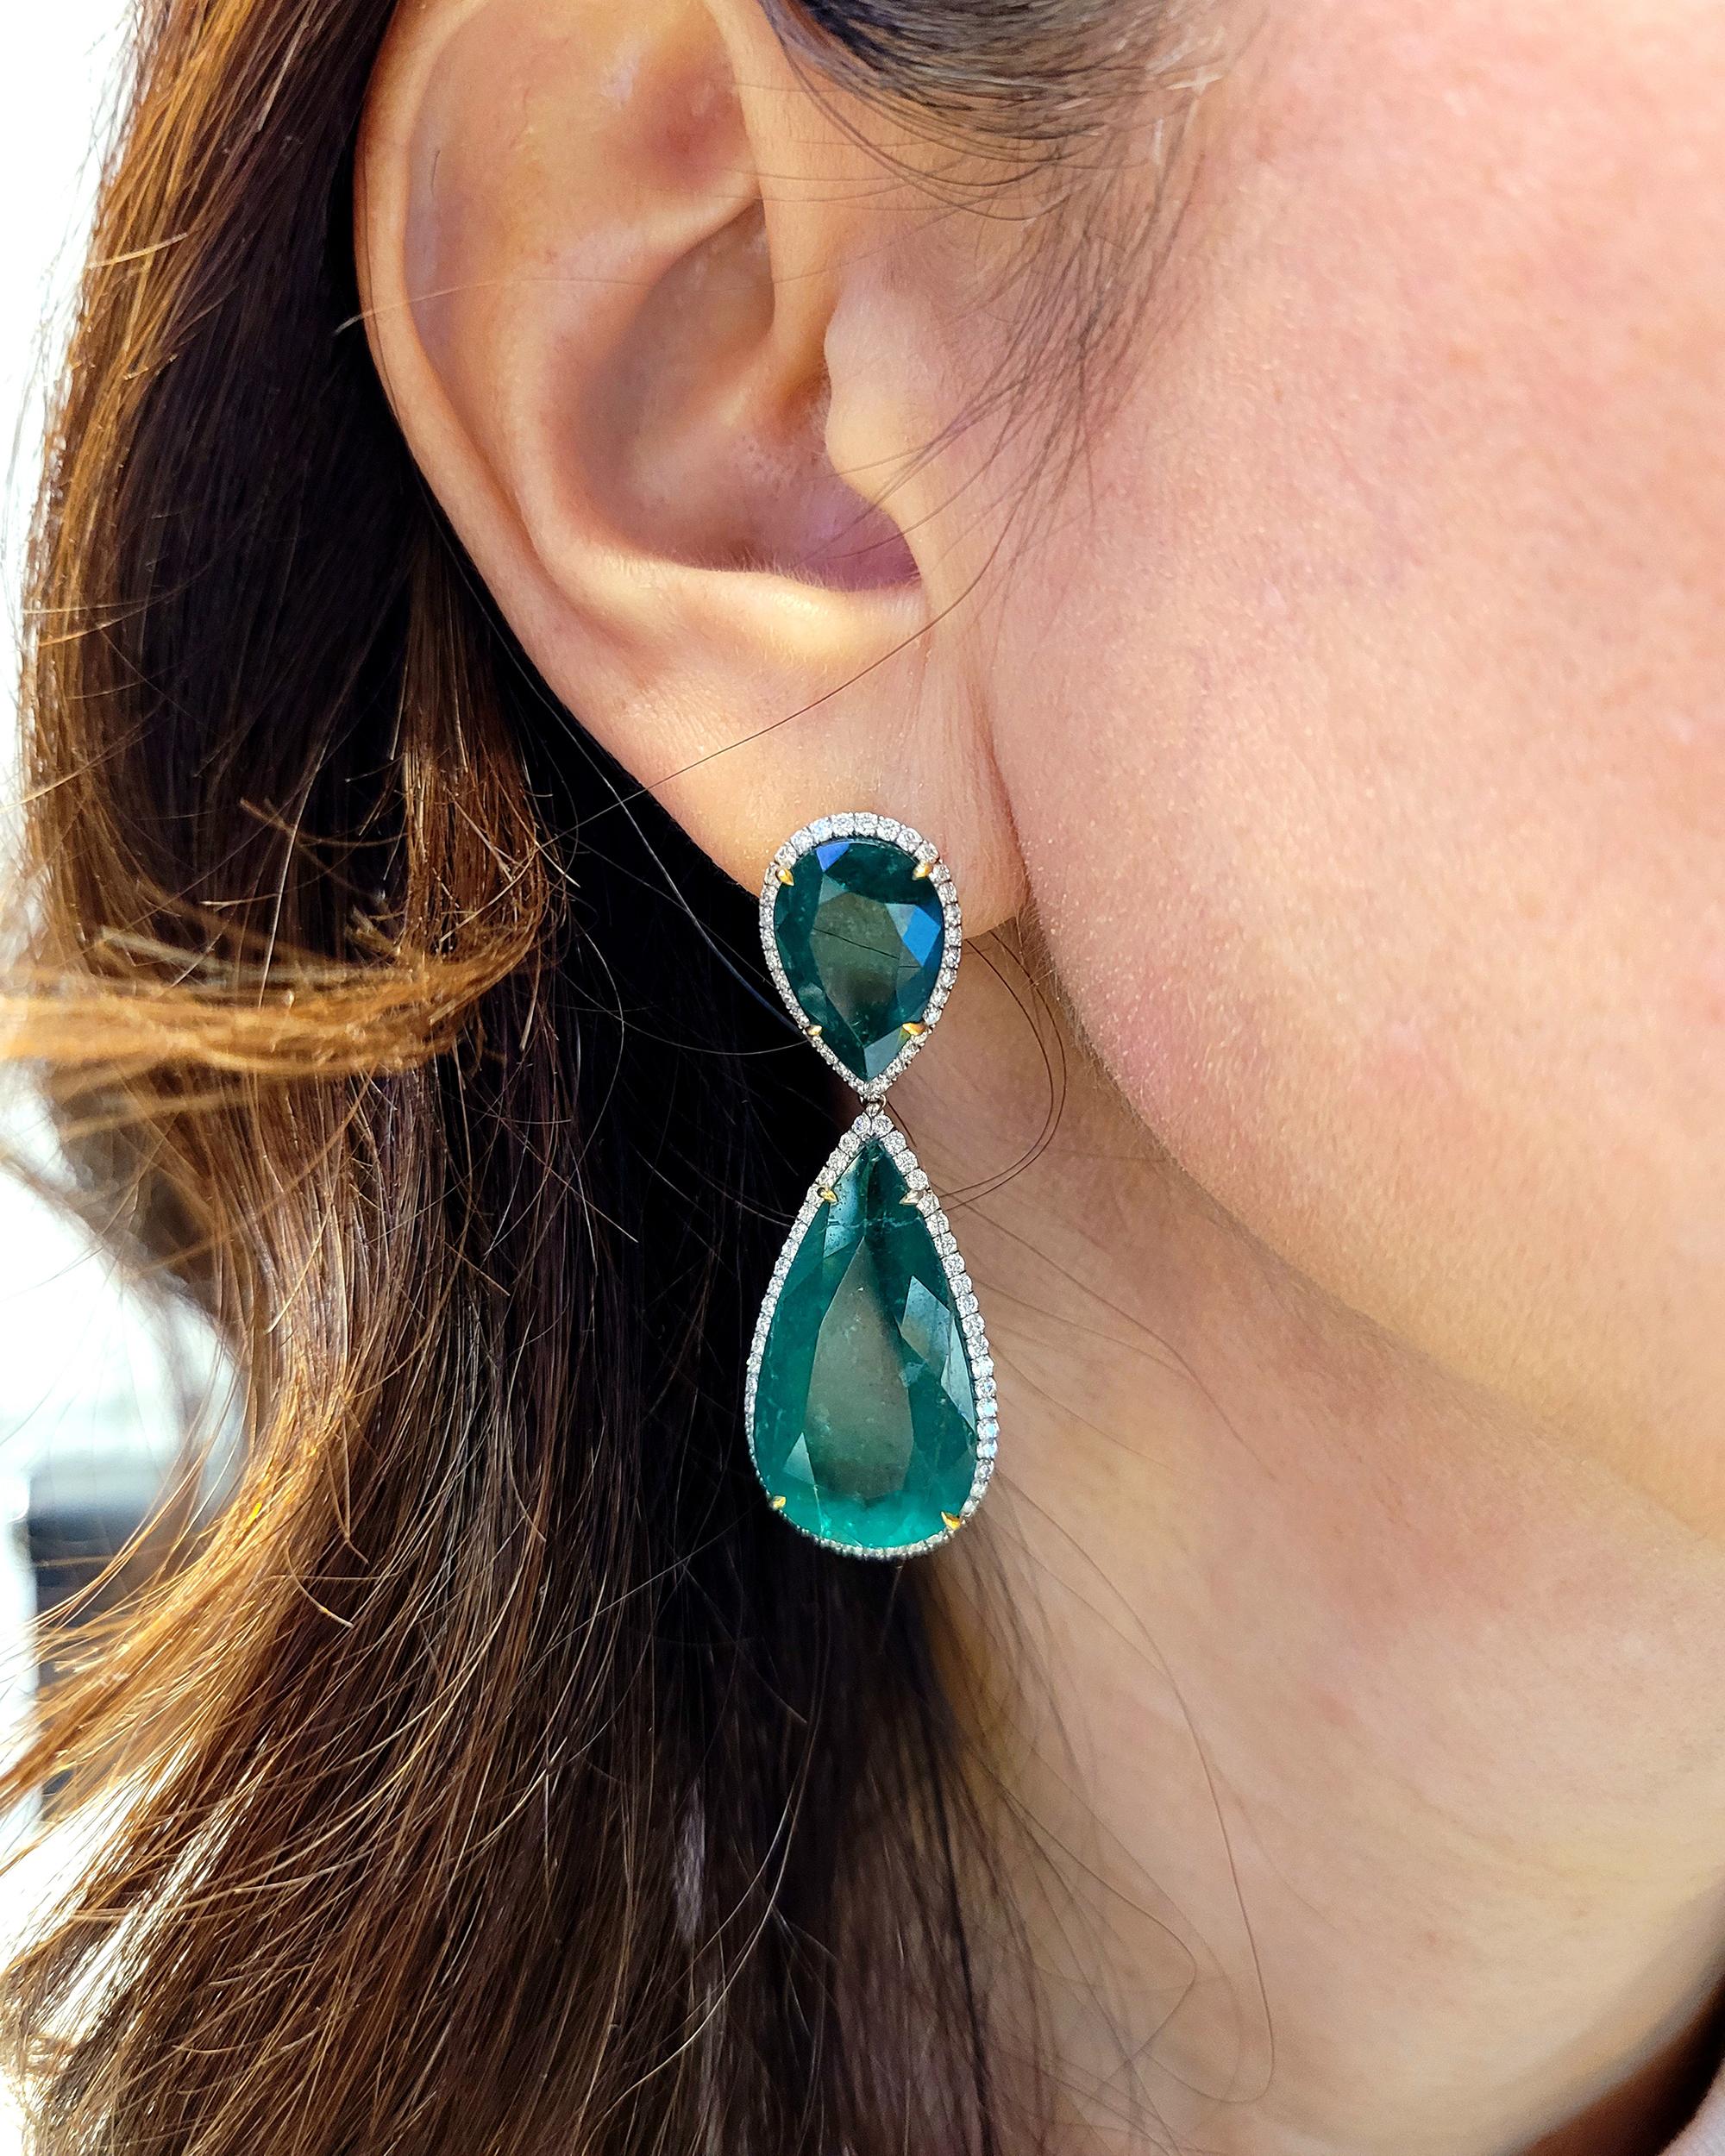 Looking for a stunning pair of drop earrings that will make a statement? Look no further than these exquisite emerald and diamond earrings. Featuring four pear-shaped Colombian emeralds, these earrings are a true masterpiece of jewelry design. The